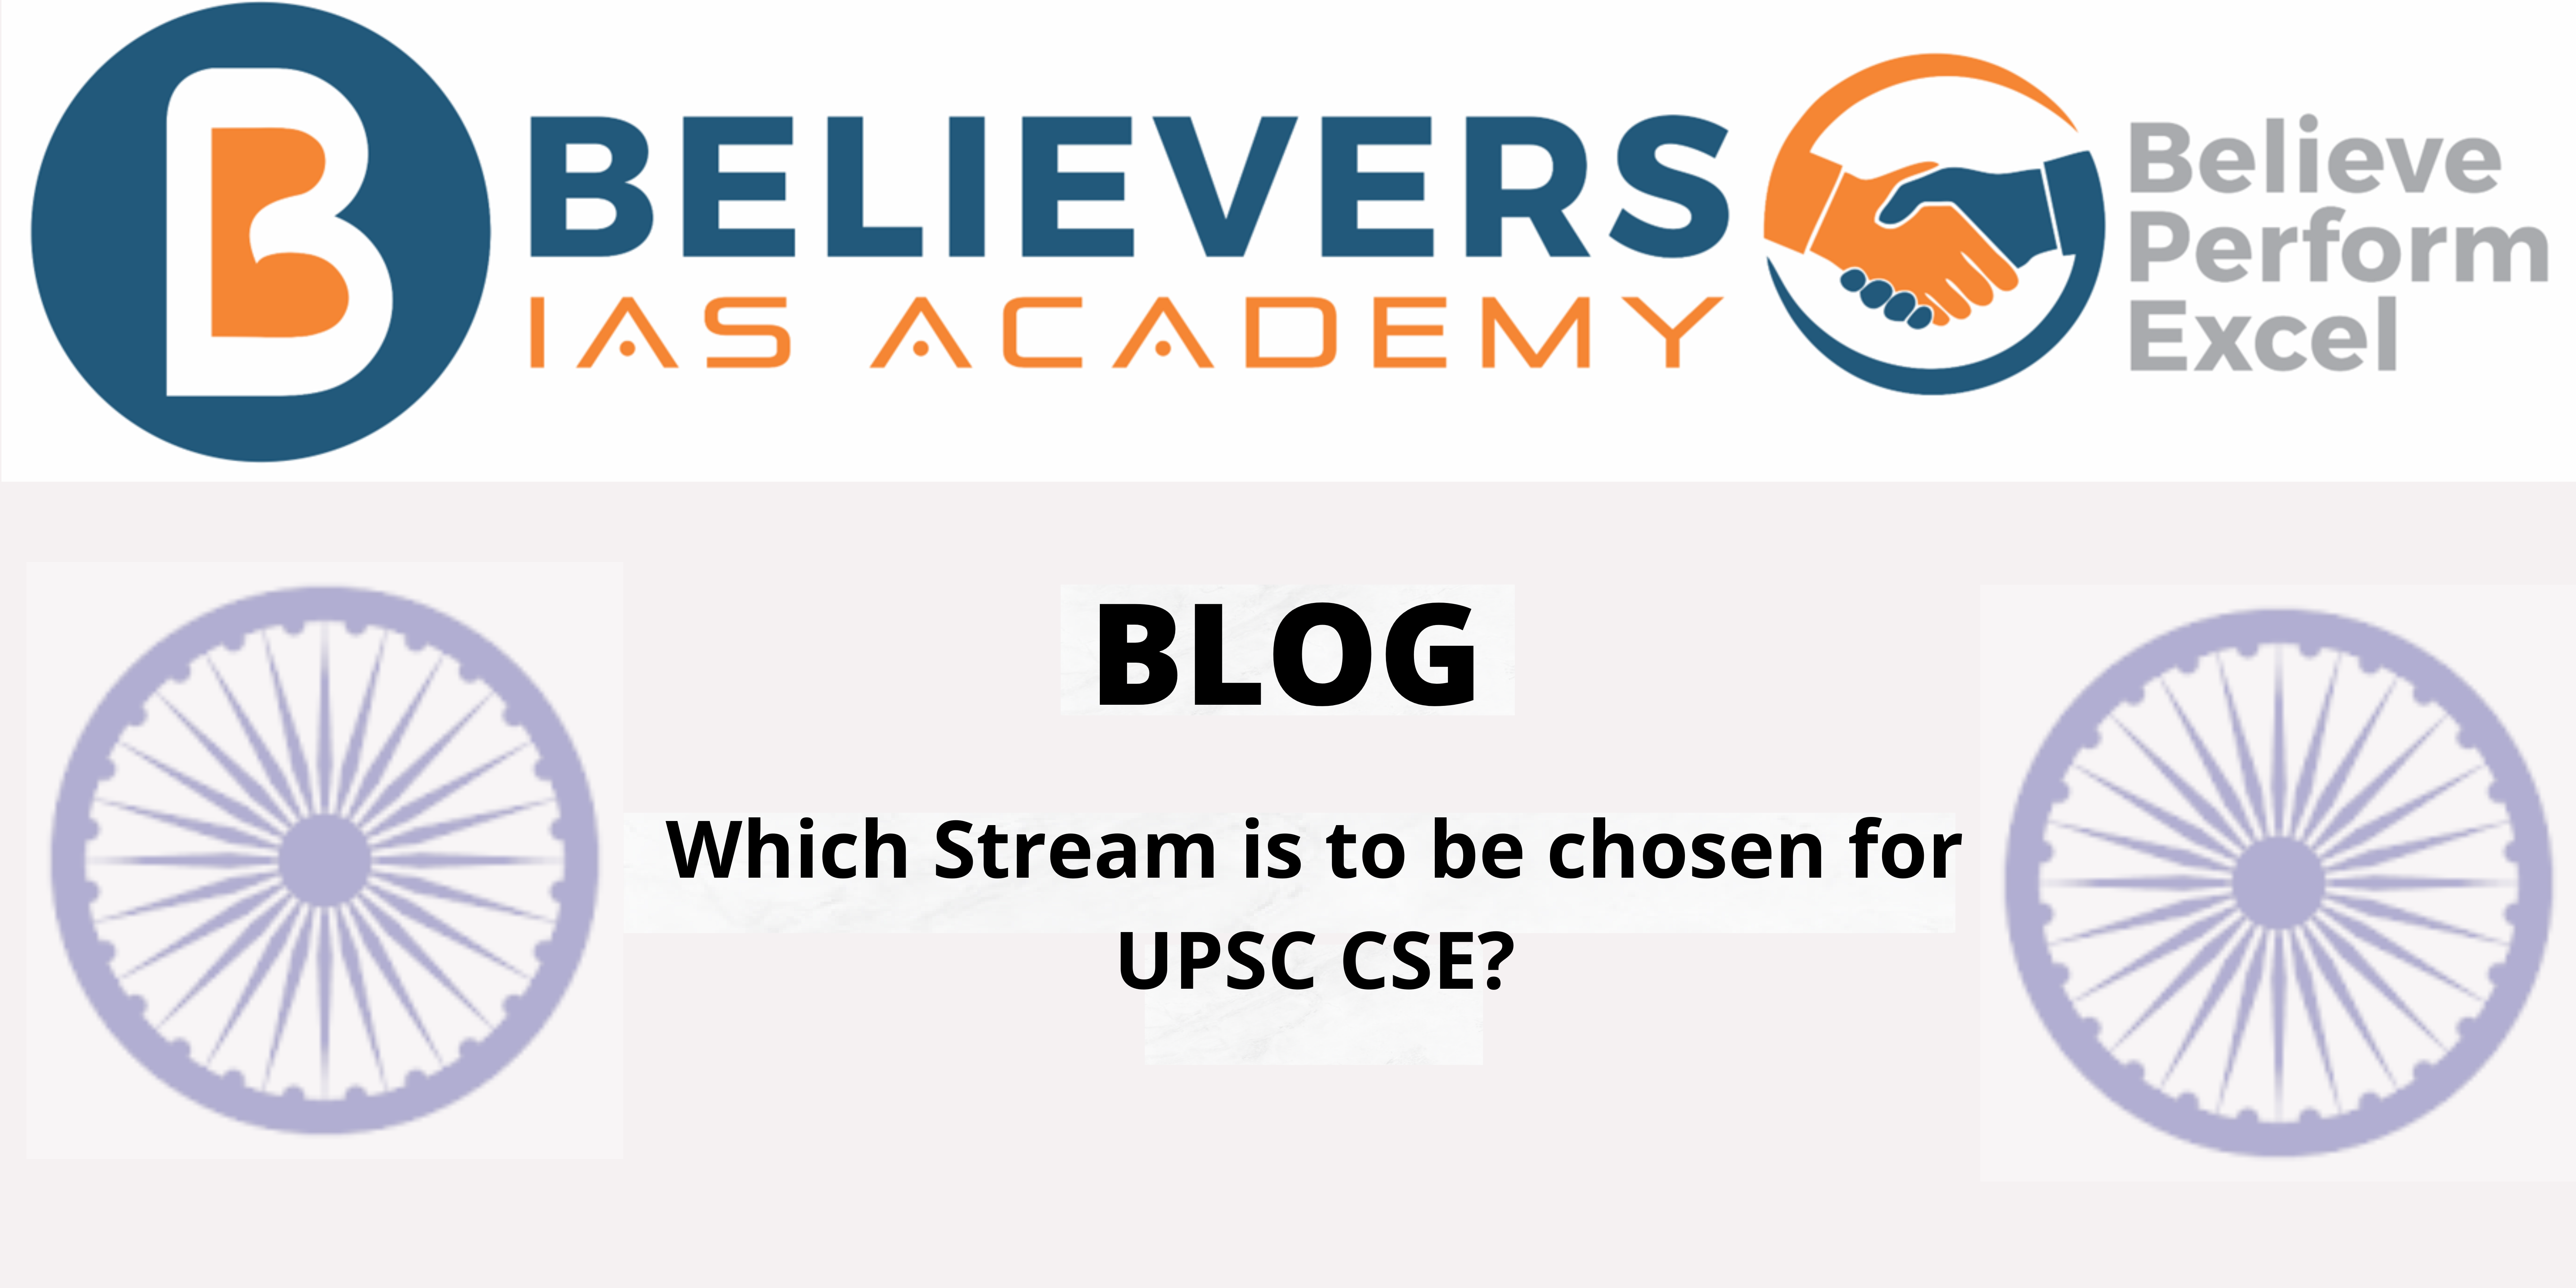 Which Stream is to be chosen for UPSC CSE?